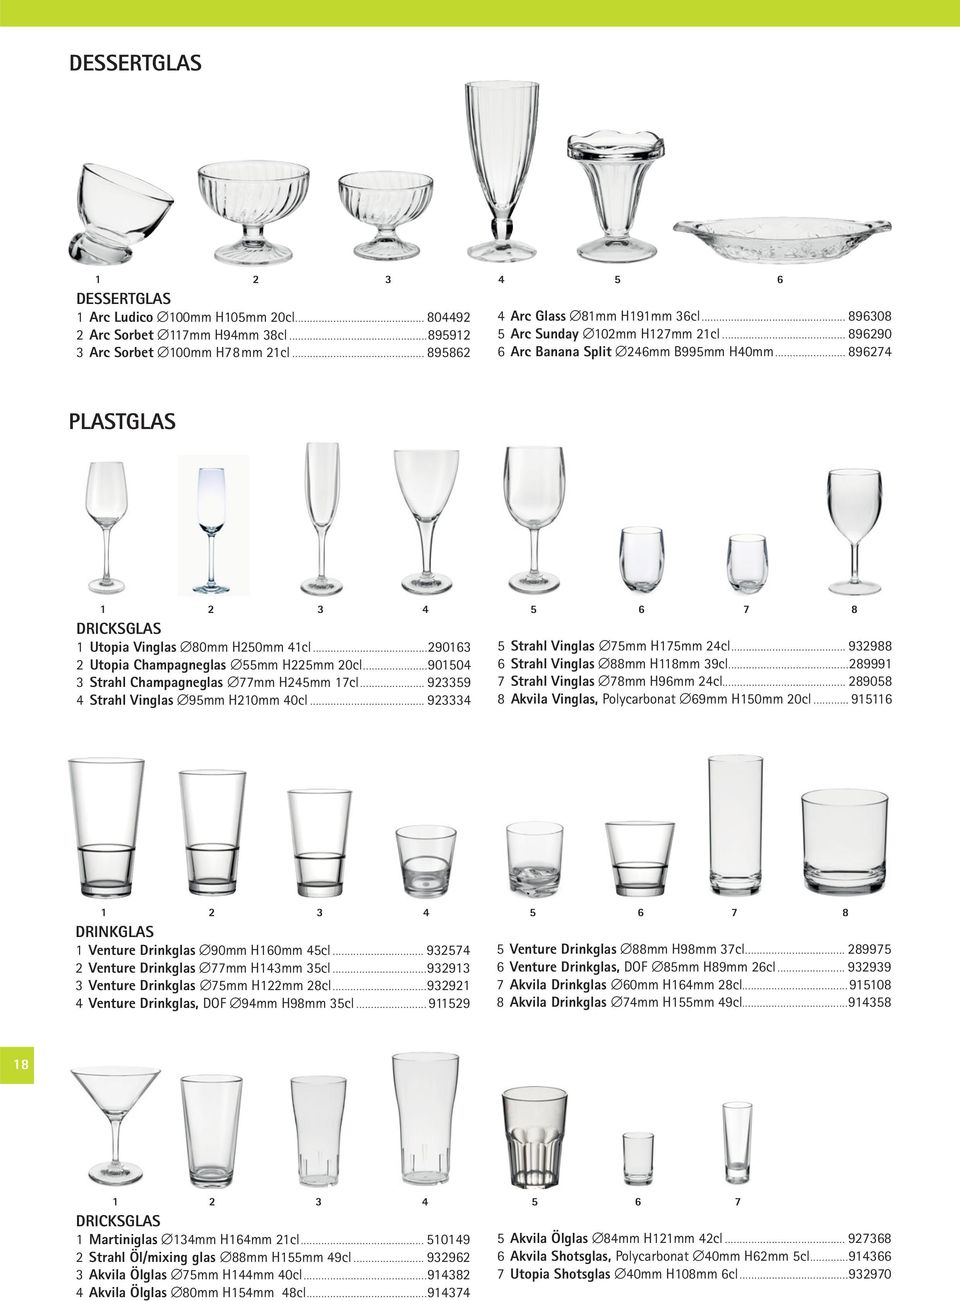 ..290163 2 Utopia Champagneglas 55mm H225mm 20cl...901504 3 Strahl Champagneglas 77mm H245mm 17cl... 923359 4 Strahl Vinglas 95mm H210mm 40cl... 923334 5 Strahl Vinglas 75mm H175mm 24cl.